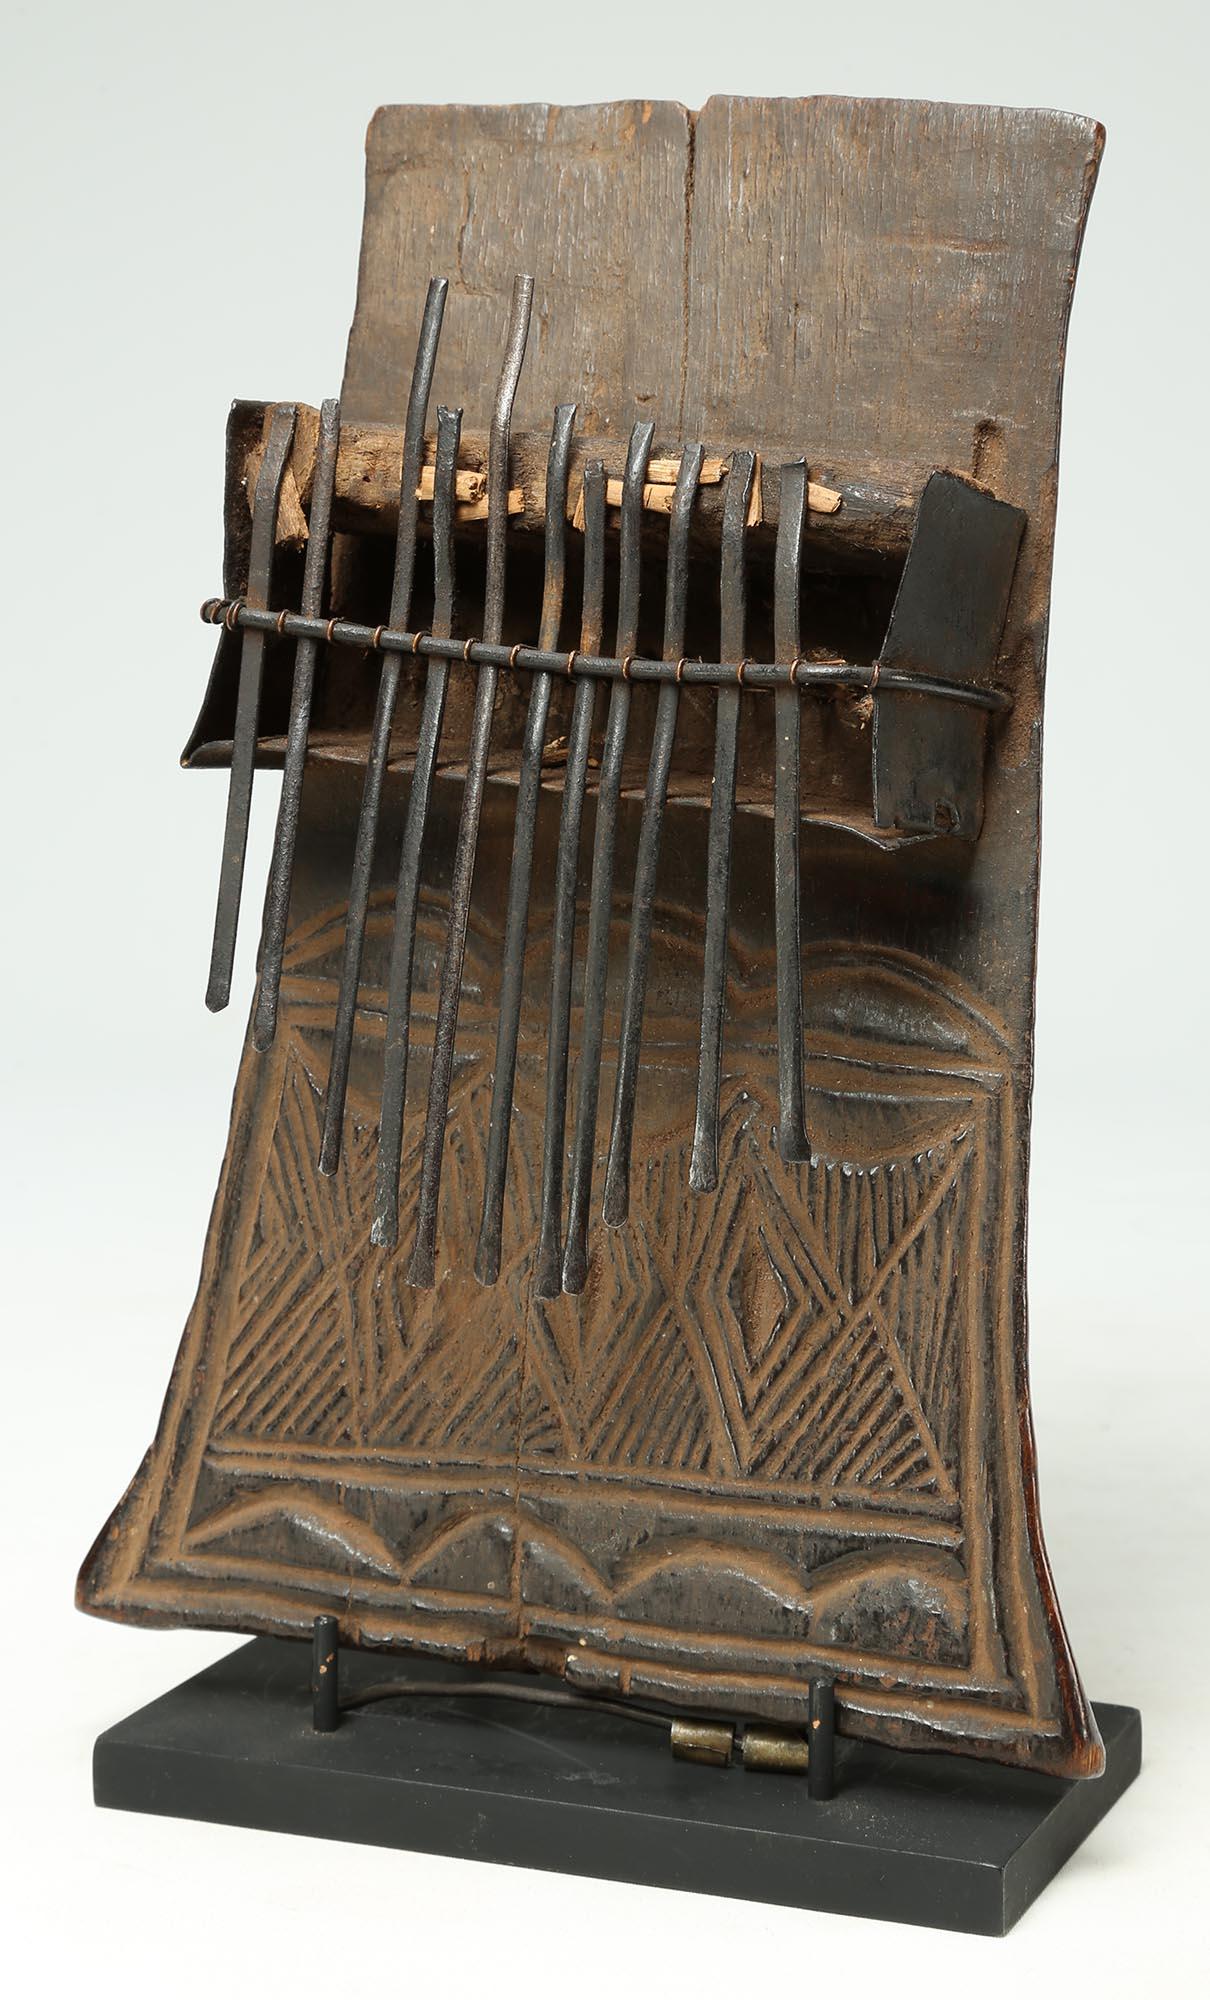 Mbira or Sanza (once known as a thumb piano), of carved wood with metal strikers. Under heavy patina is incised design with three stylized cowrie shells (also resemble human eyes) over a fluid geometric pattern. Created in the Congo region in the